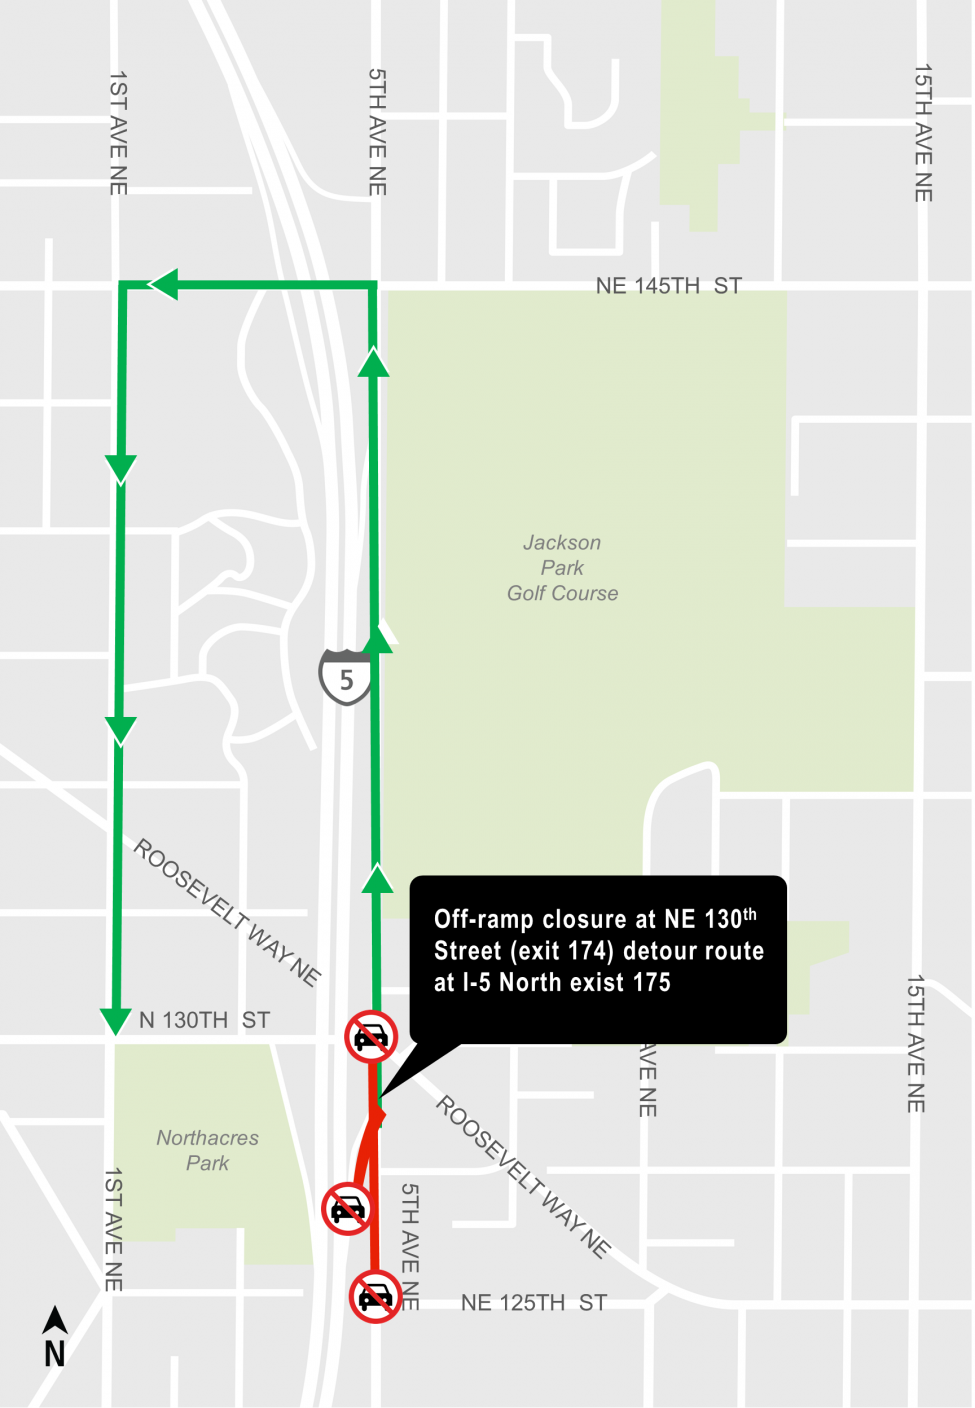 Map showing Interstate 5 exit 174 off-ramp closure and detour via exit 175.